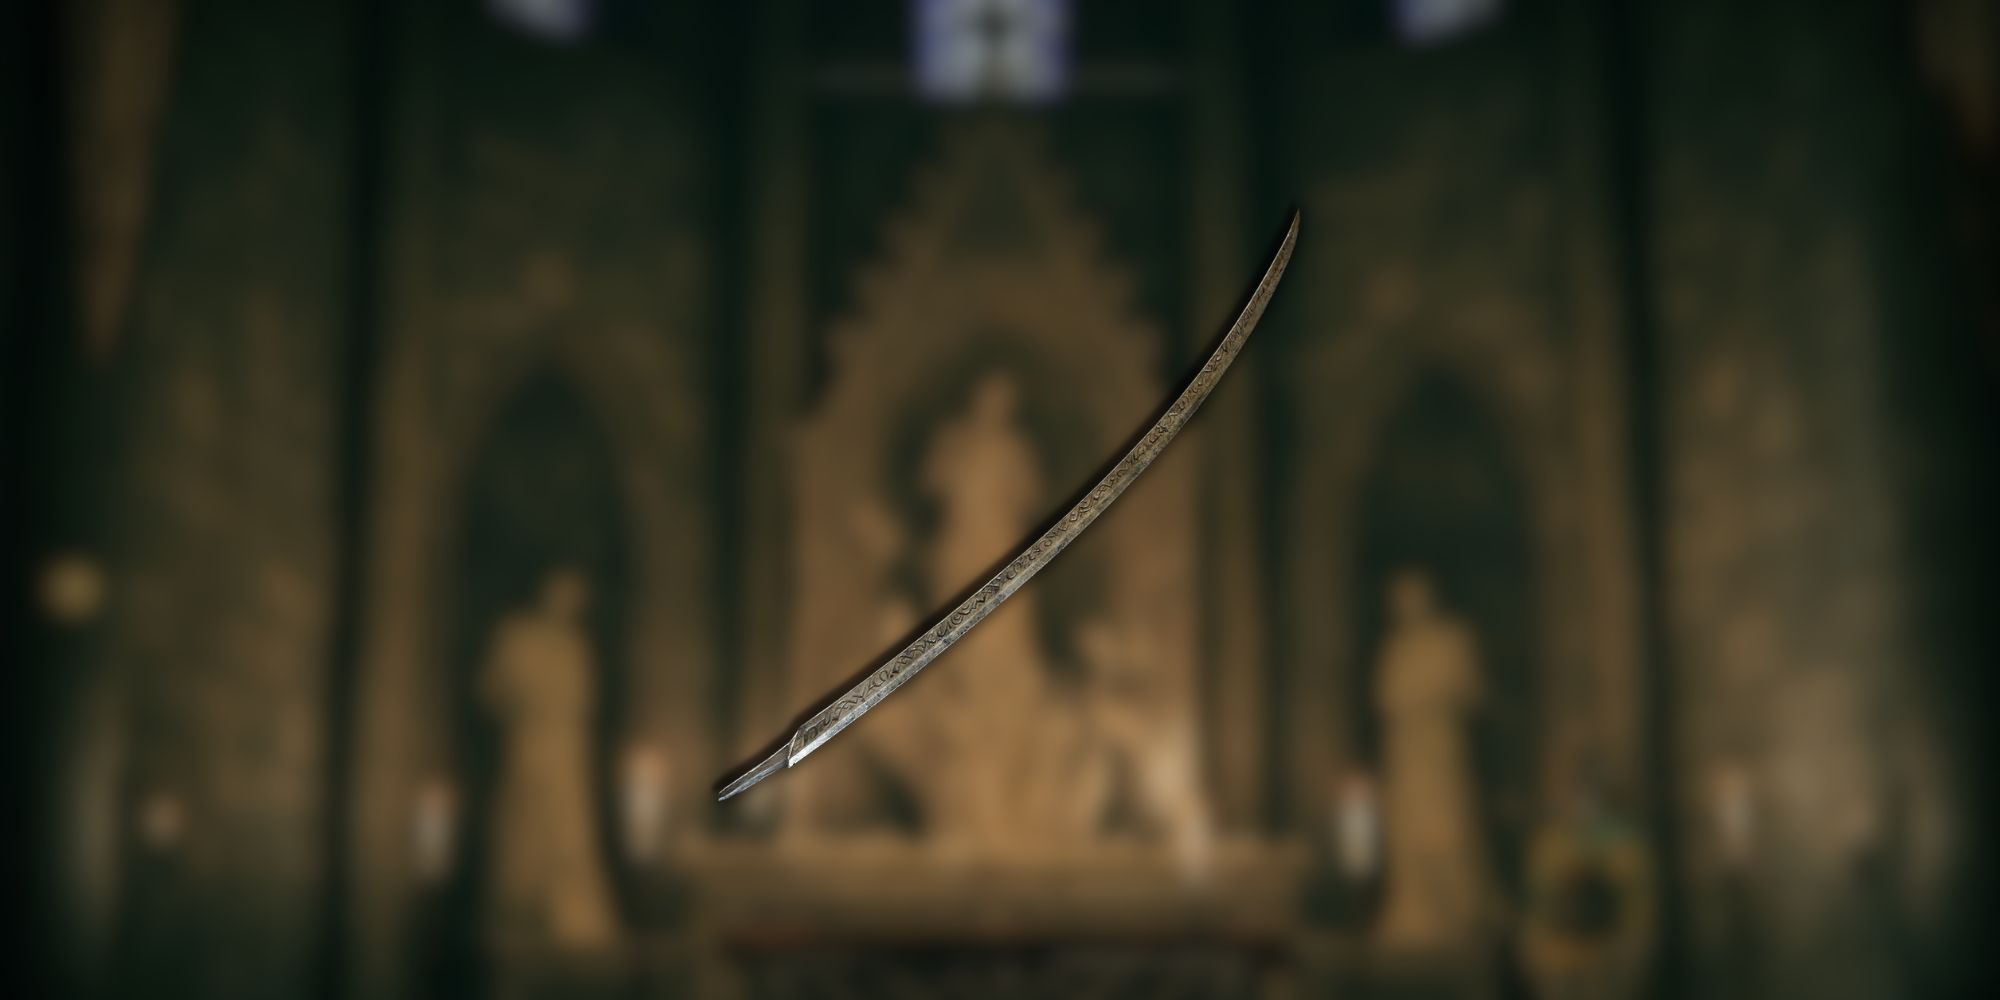 A long katana blade with engraved wording overlayed over a blurred background.